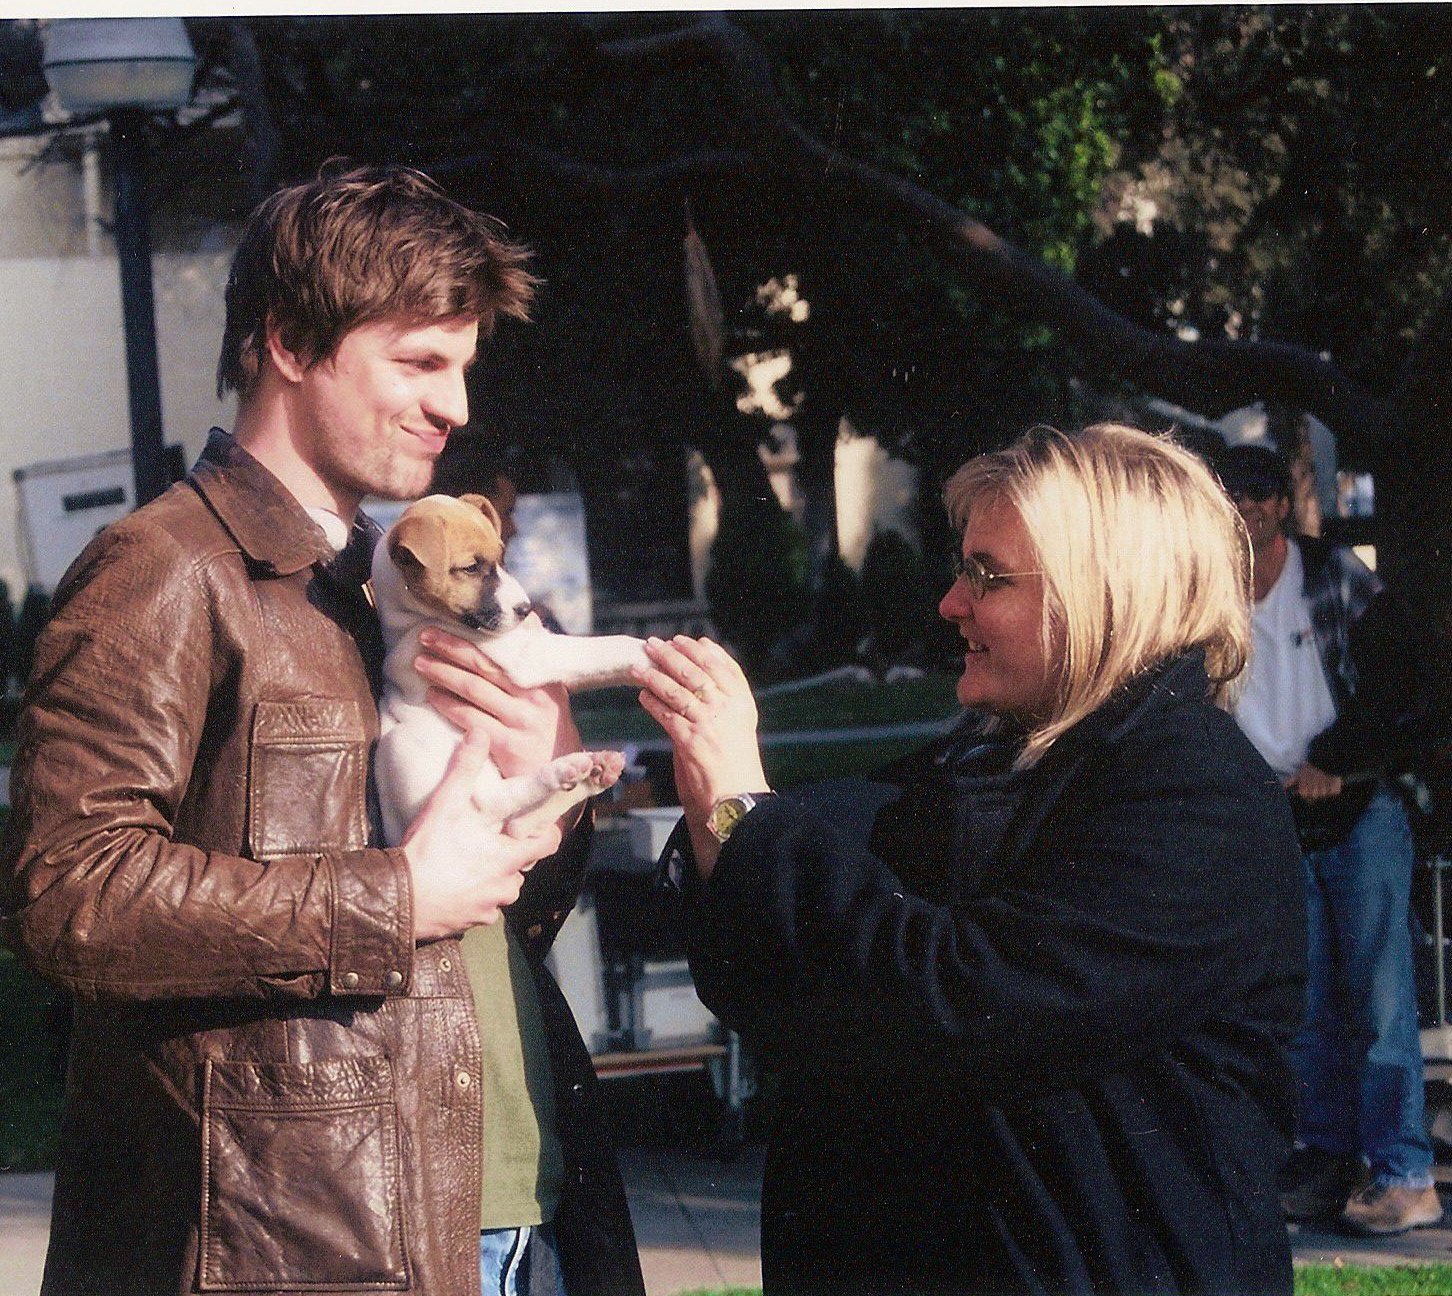 on set of New York Summer Project (aka the Revolution) with actor Gale Harold and writer/director/producer Michele Noble